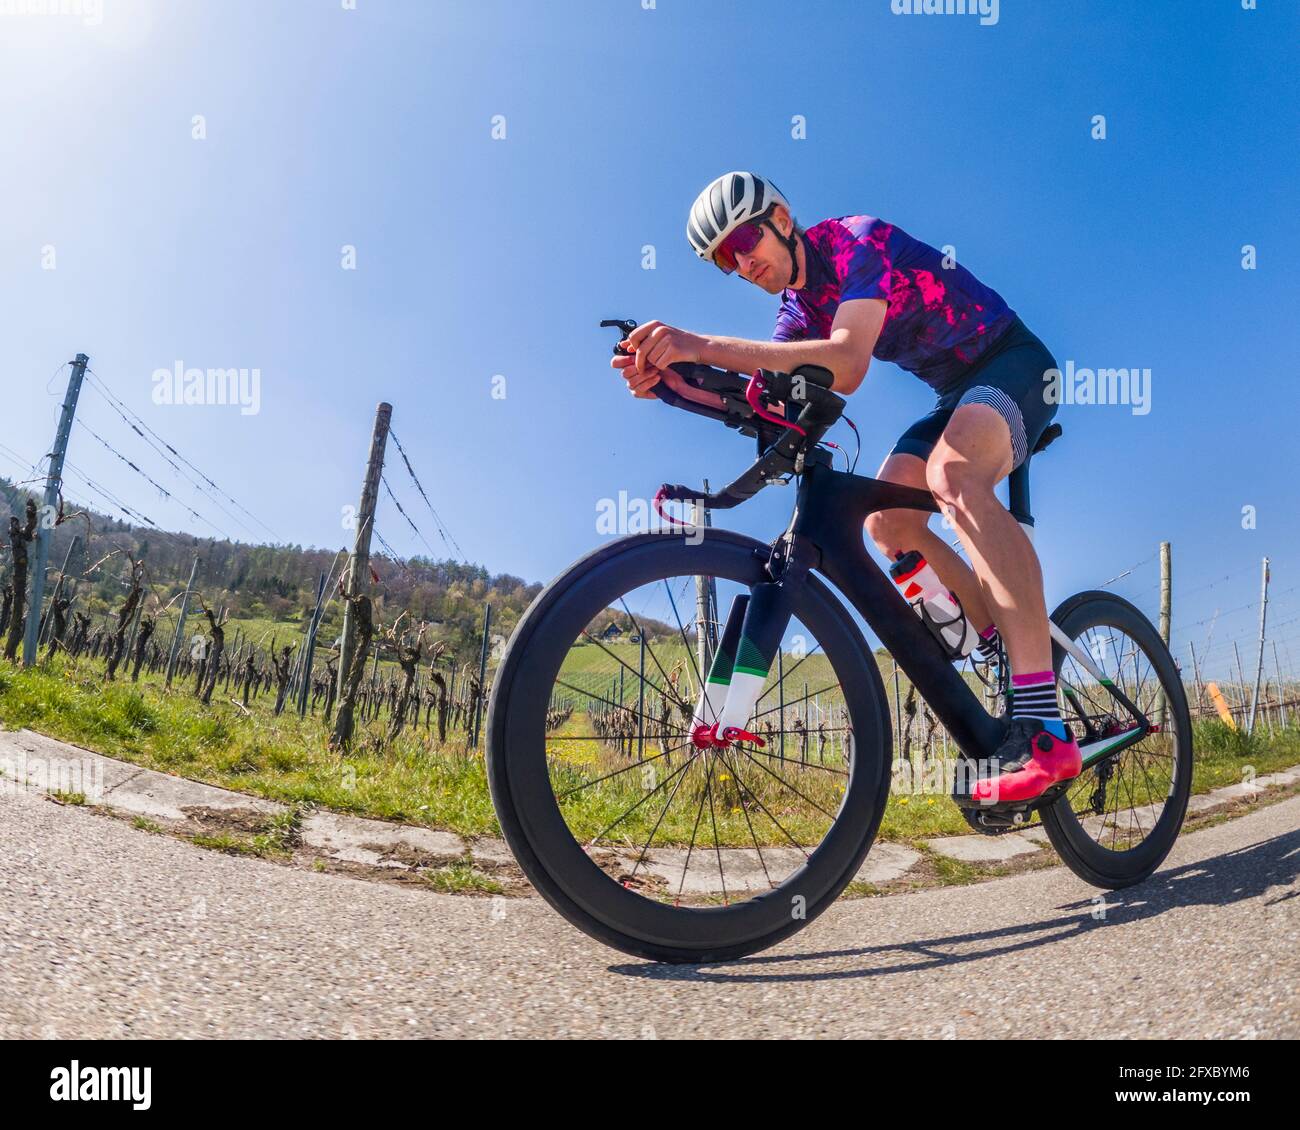 Active man riding racing bicycle on road Stock Photo